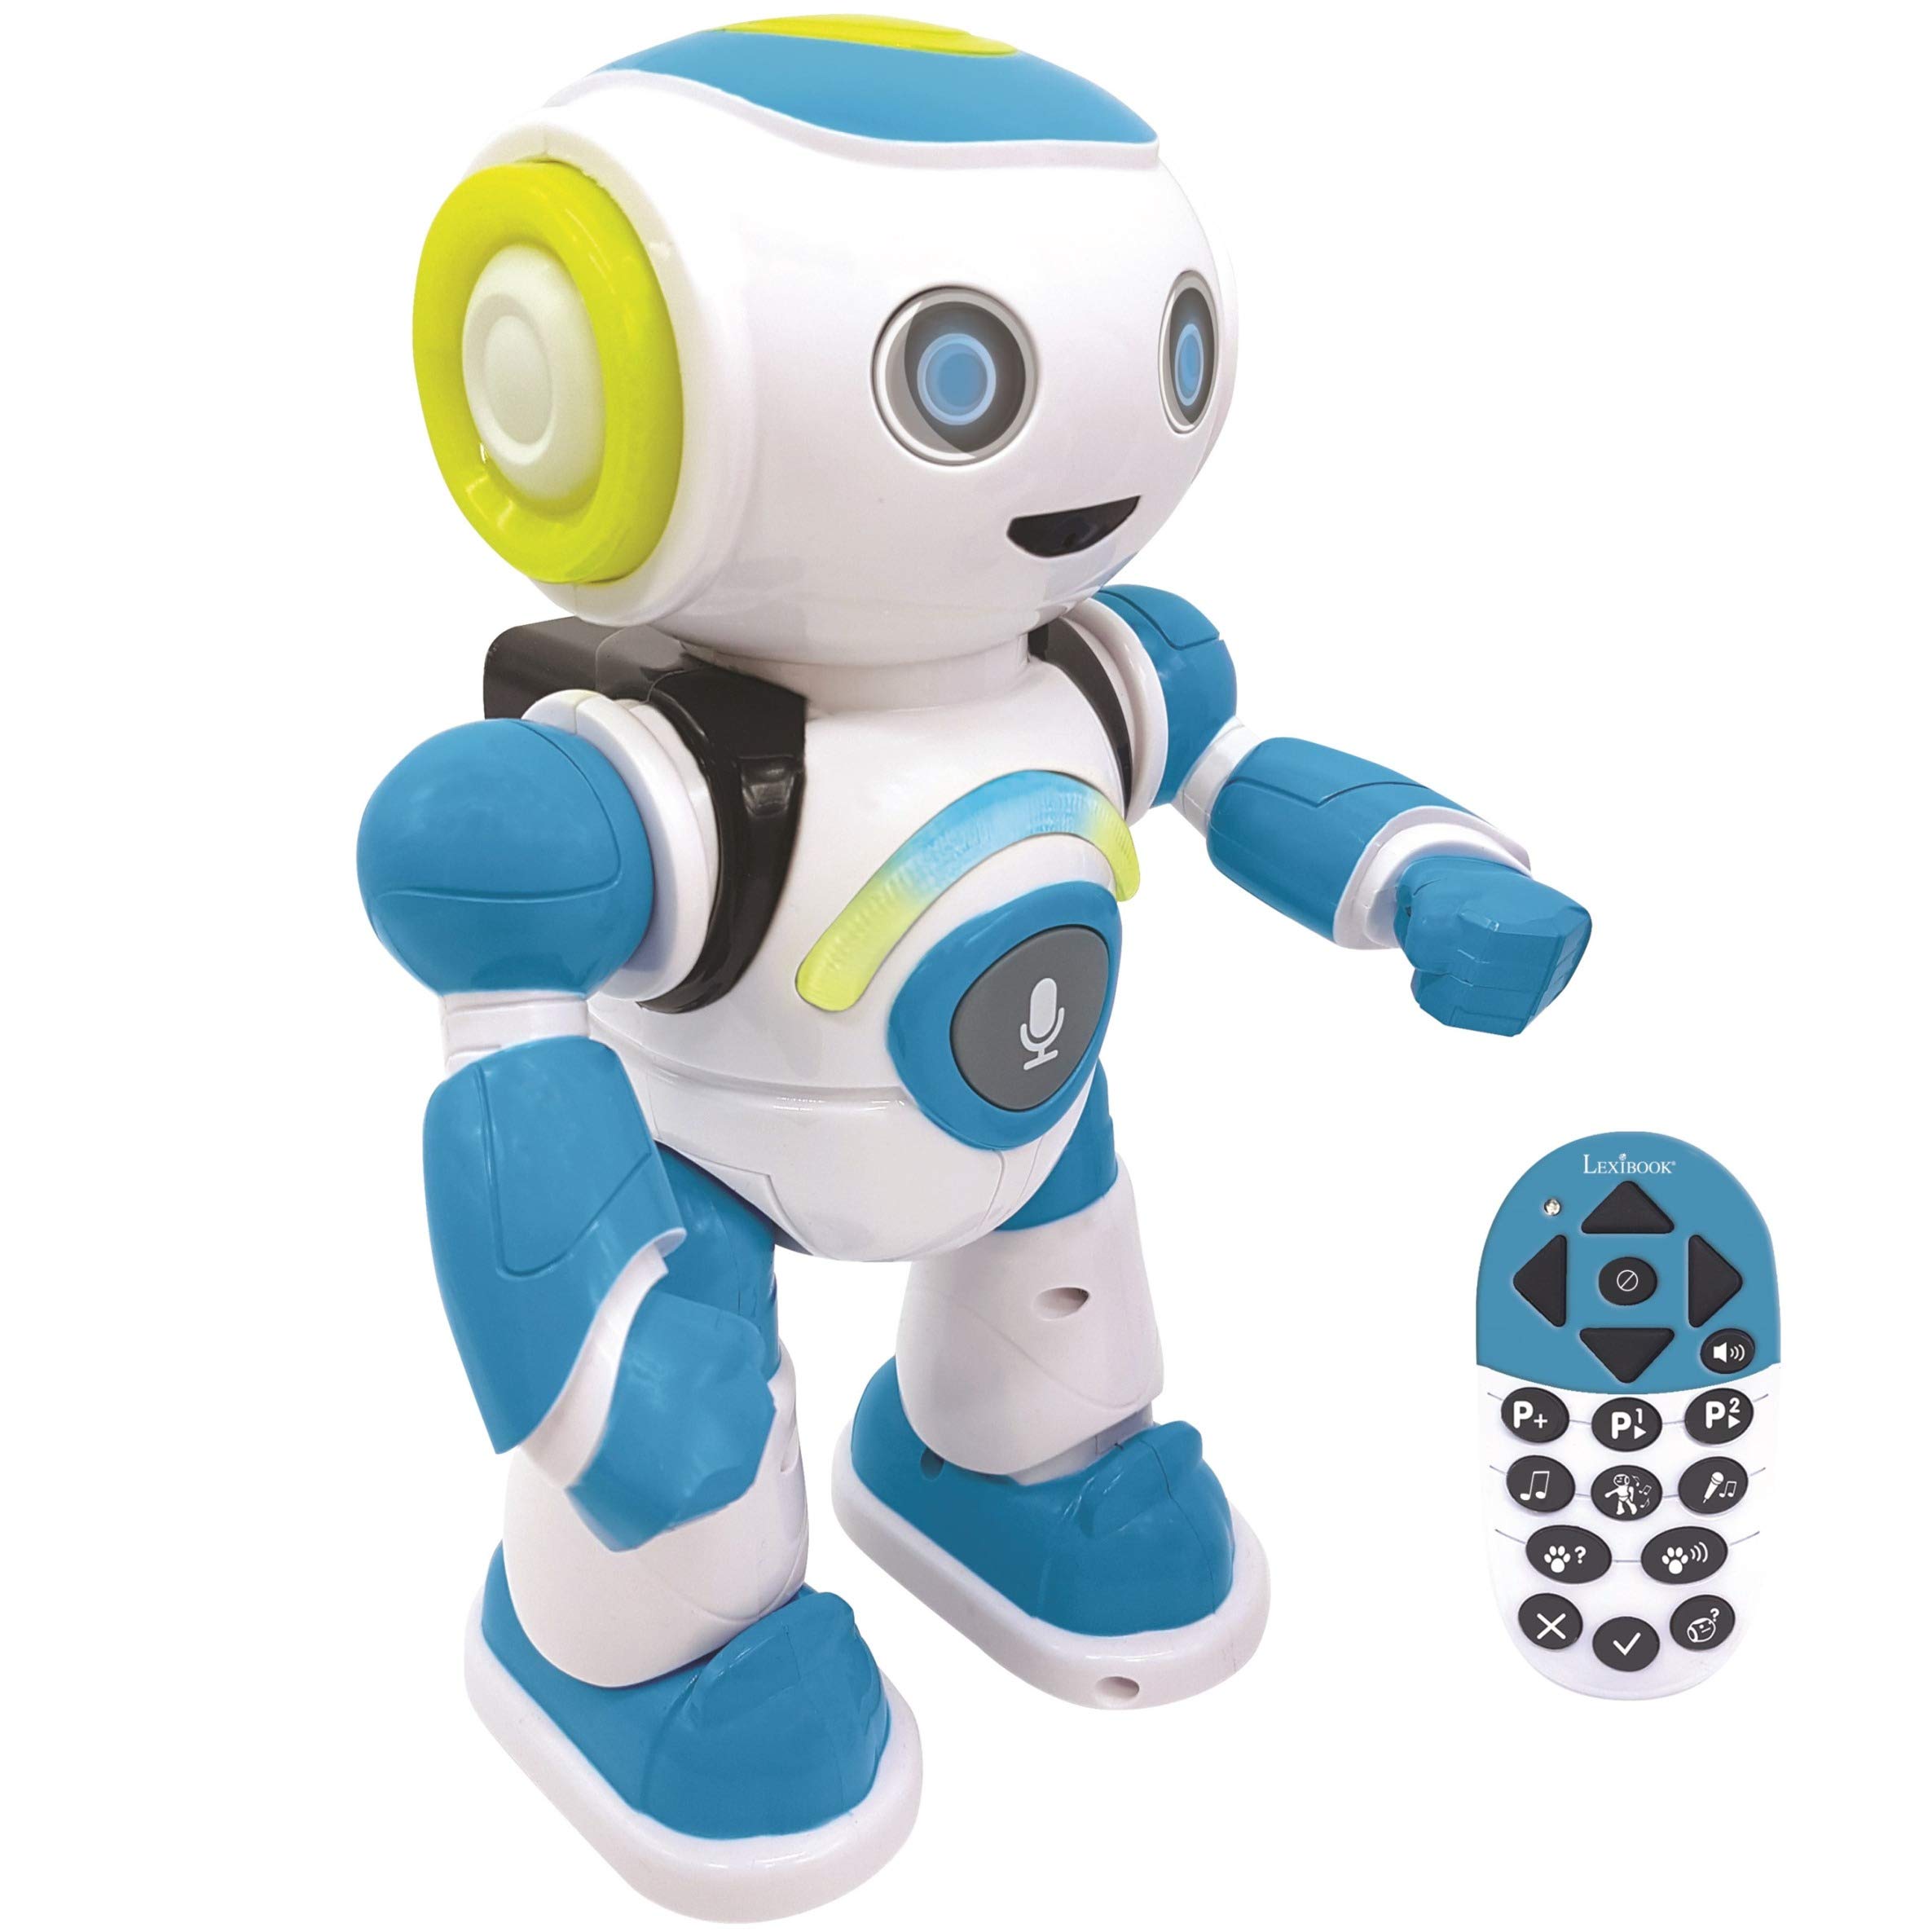 Lexibook - Powerman Jr. Smart Interactive Toy That Reads in The Mind Toy for Kids Dancing Plays Music Animal Quiz STEM Programmable Remote Control Boy Robot Junior Green/Blue - ROB20EN